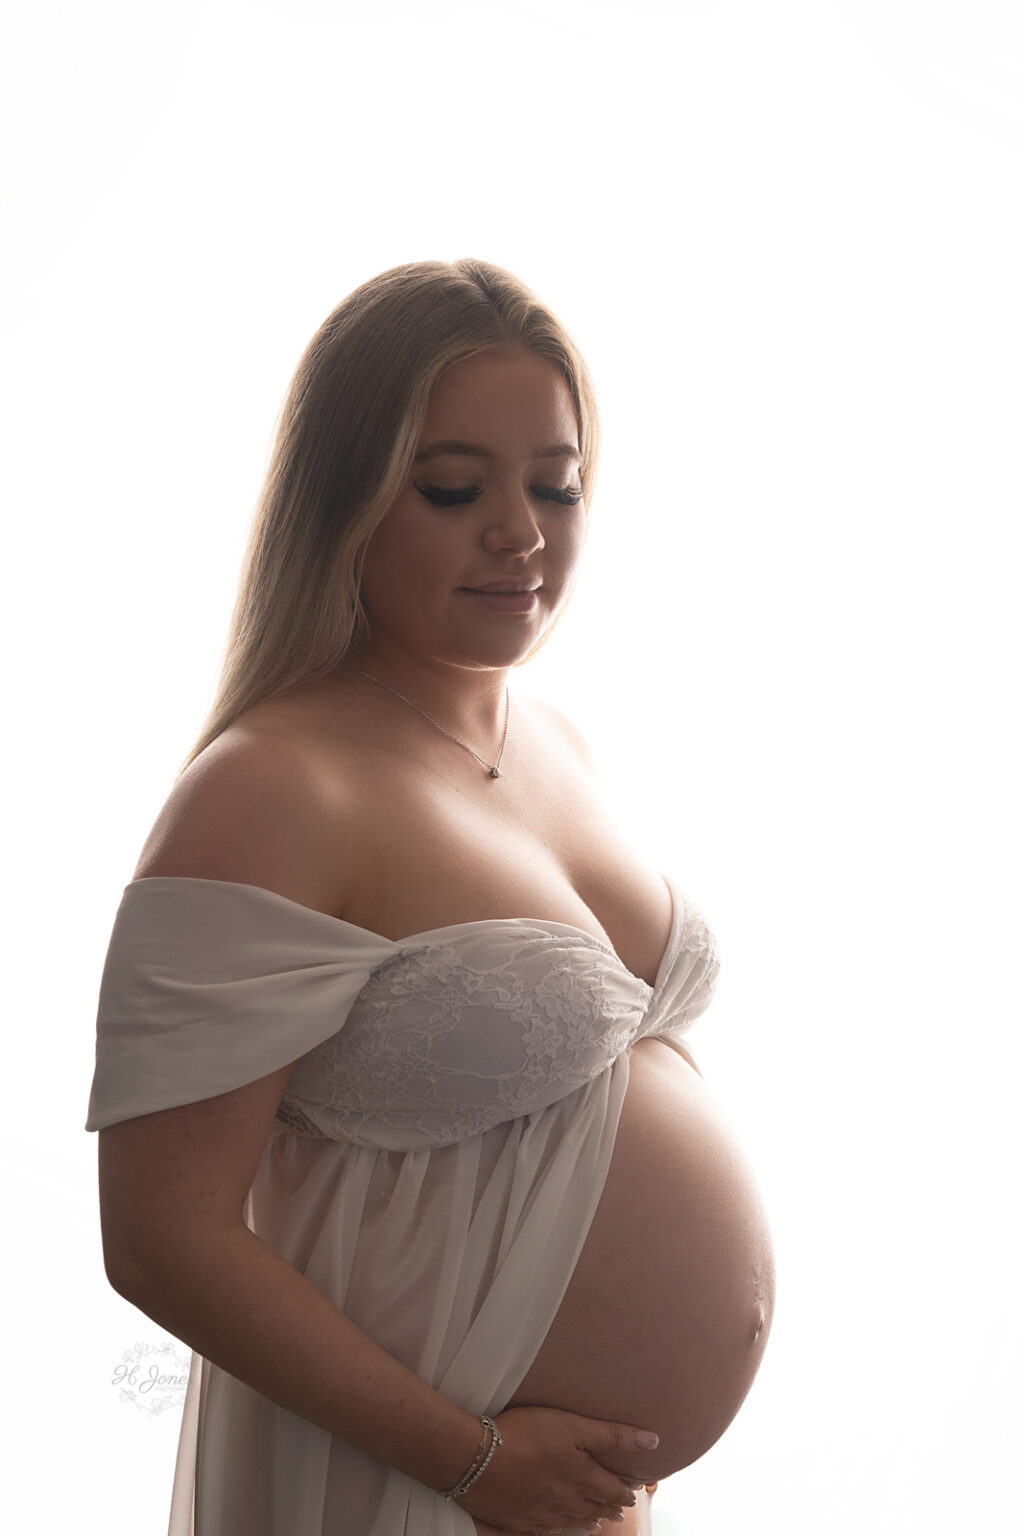 Pregnant lady wearing white maternity gown with bump exposed posing for a maternity photoshoot.